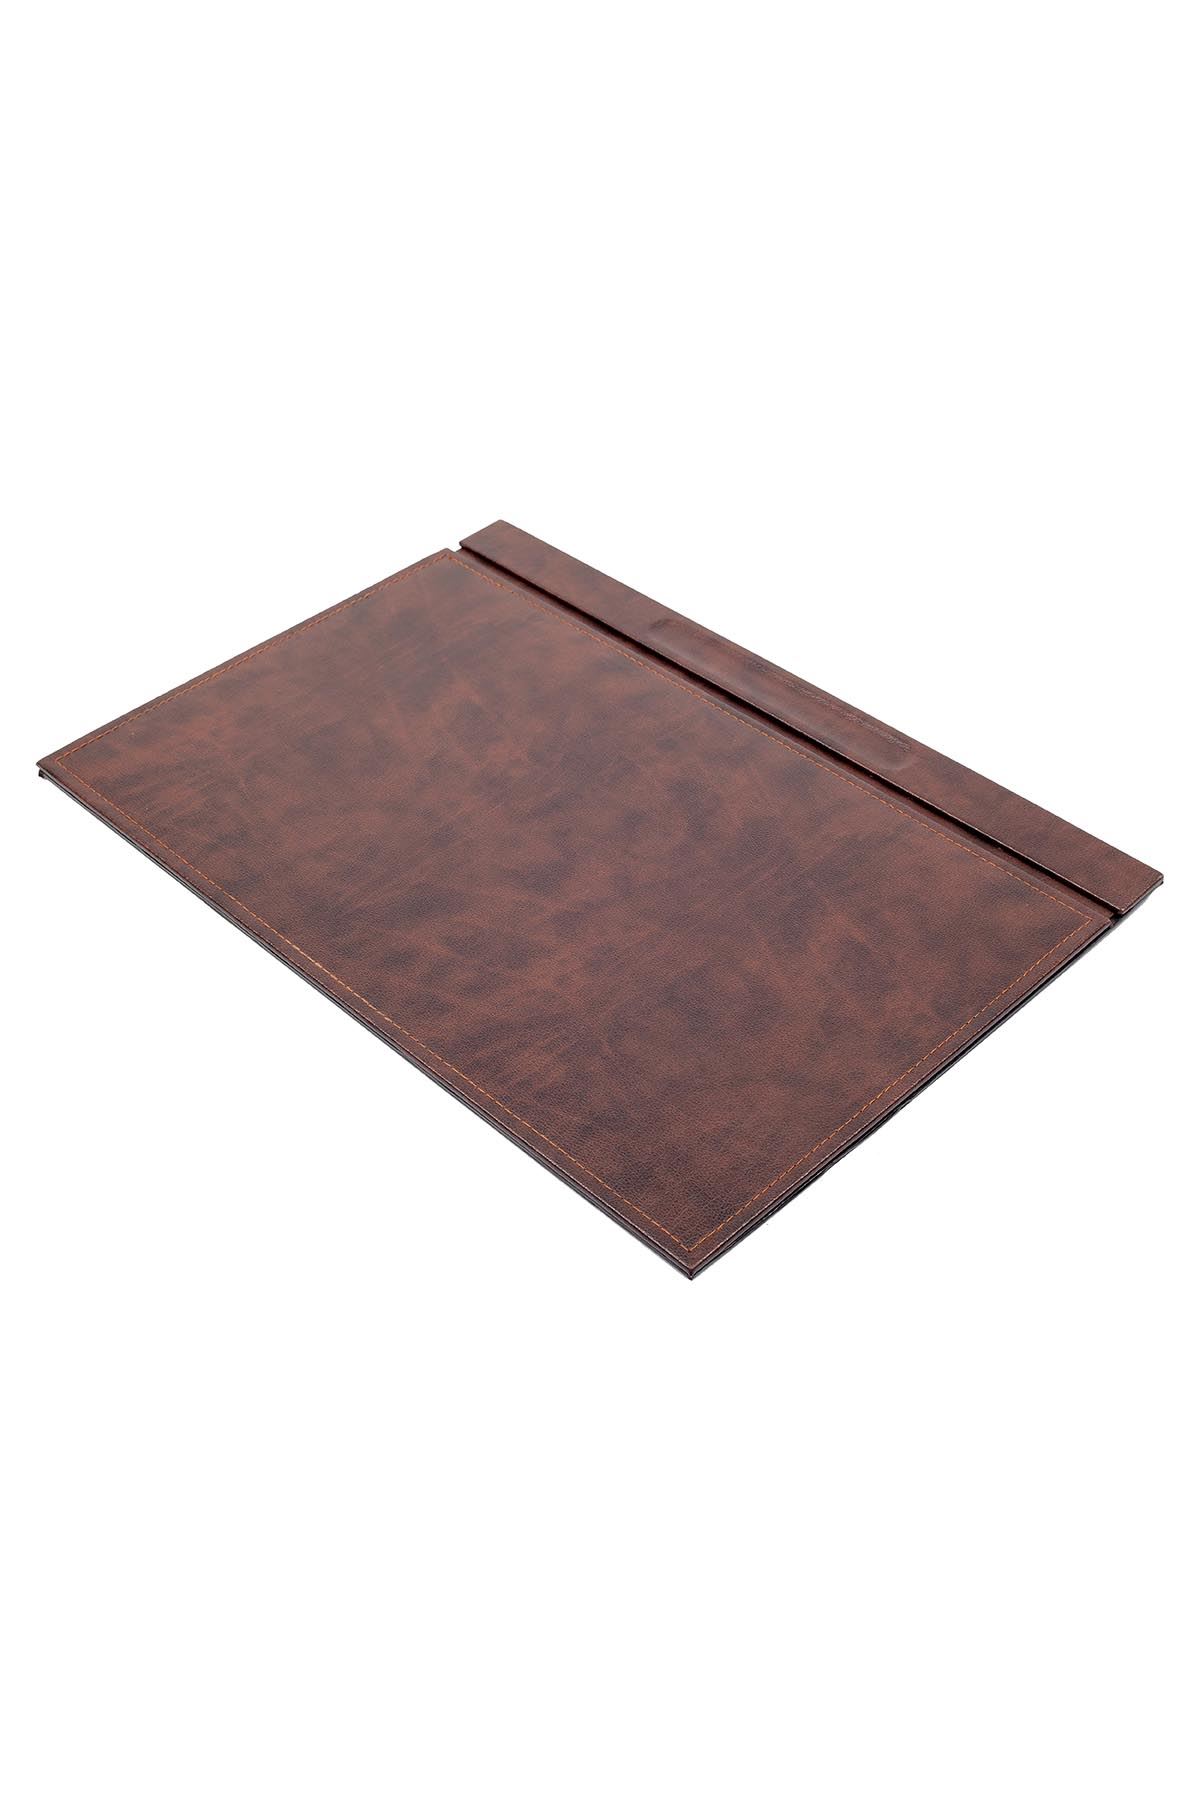 Luxury Leather Desk Set Brown 10 Accessories - Double Document Tray